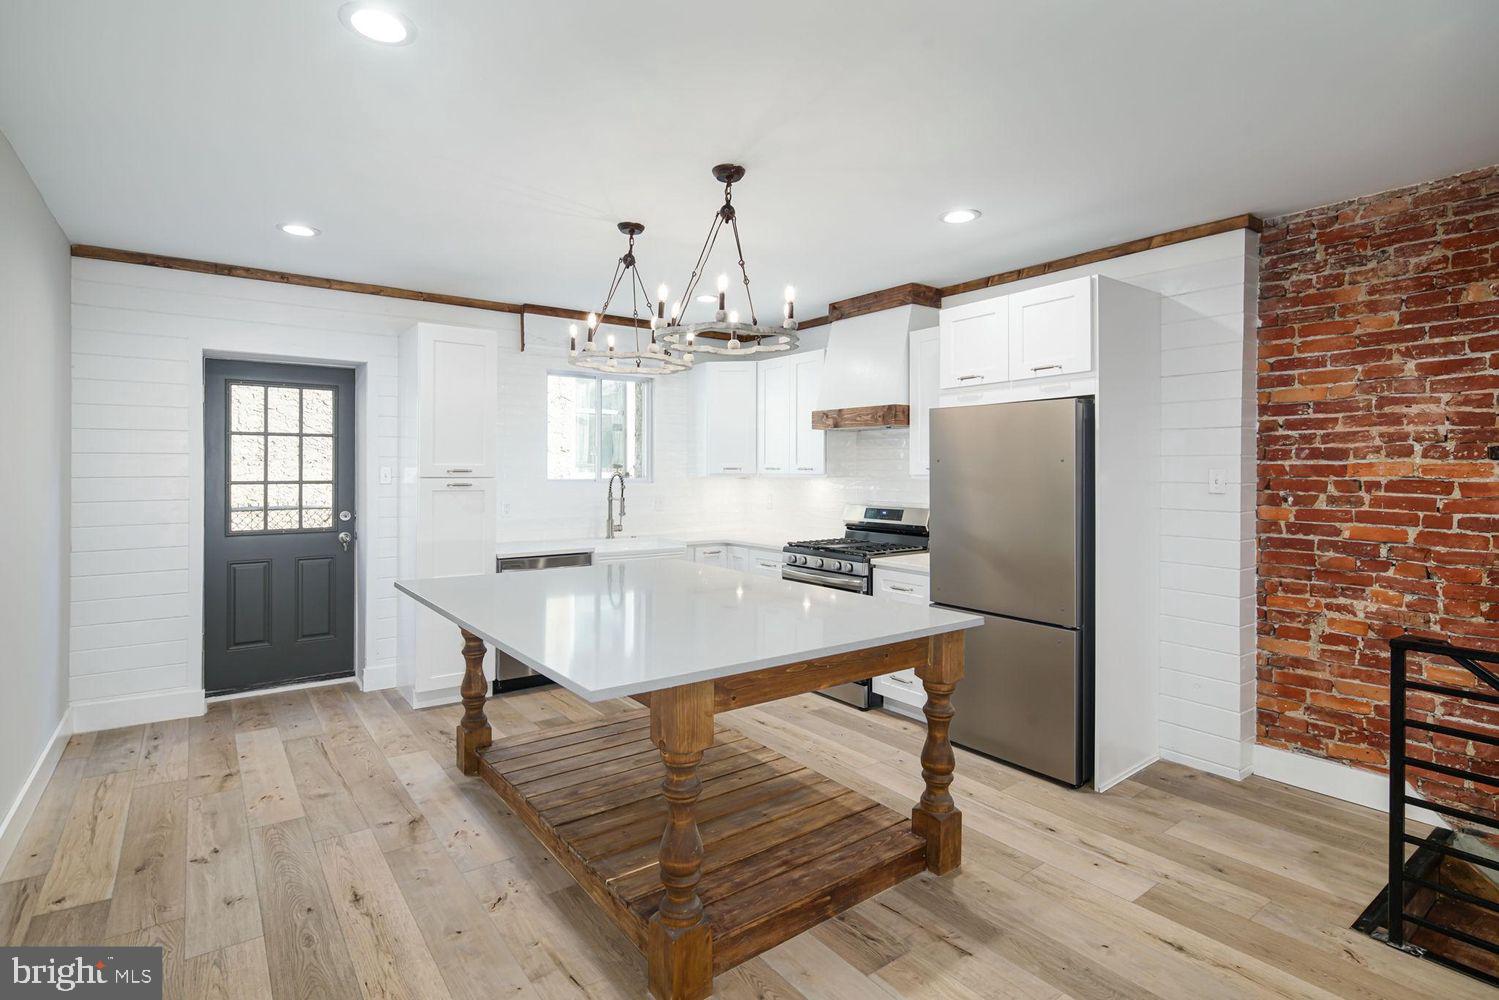 a room with stainless steel appliances a dining table wooden floor and a refrigerator